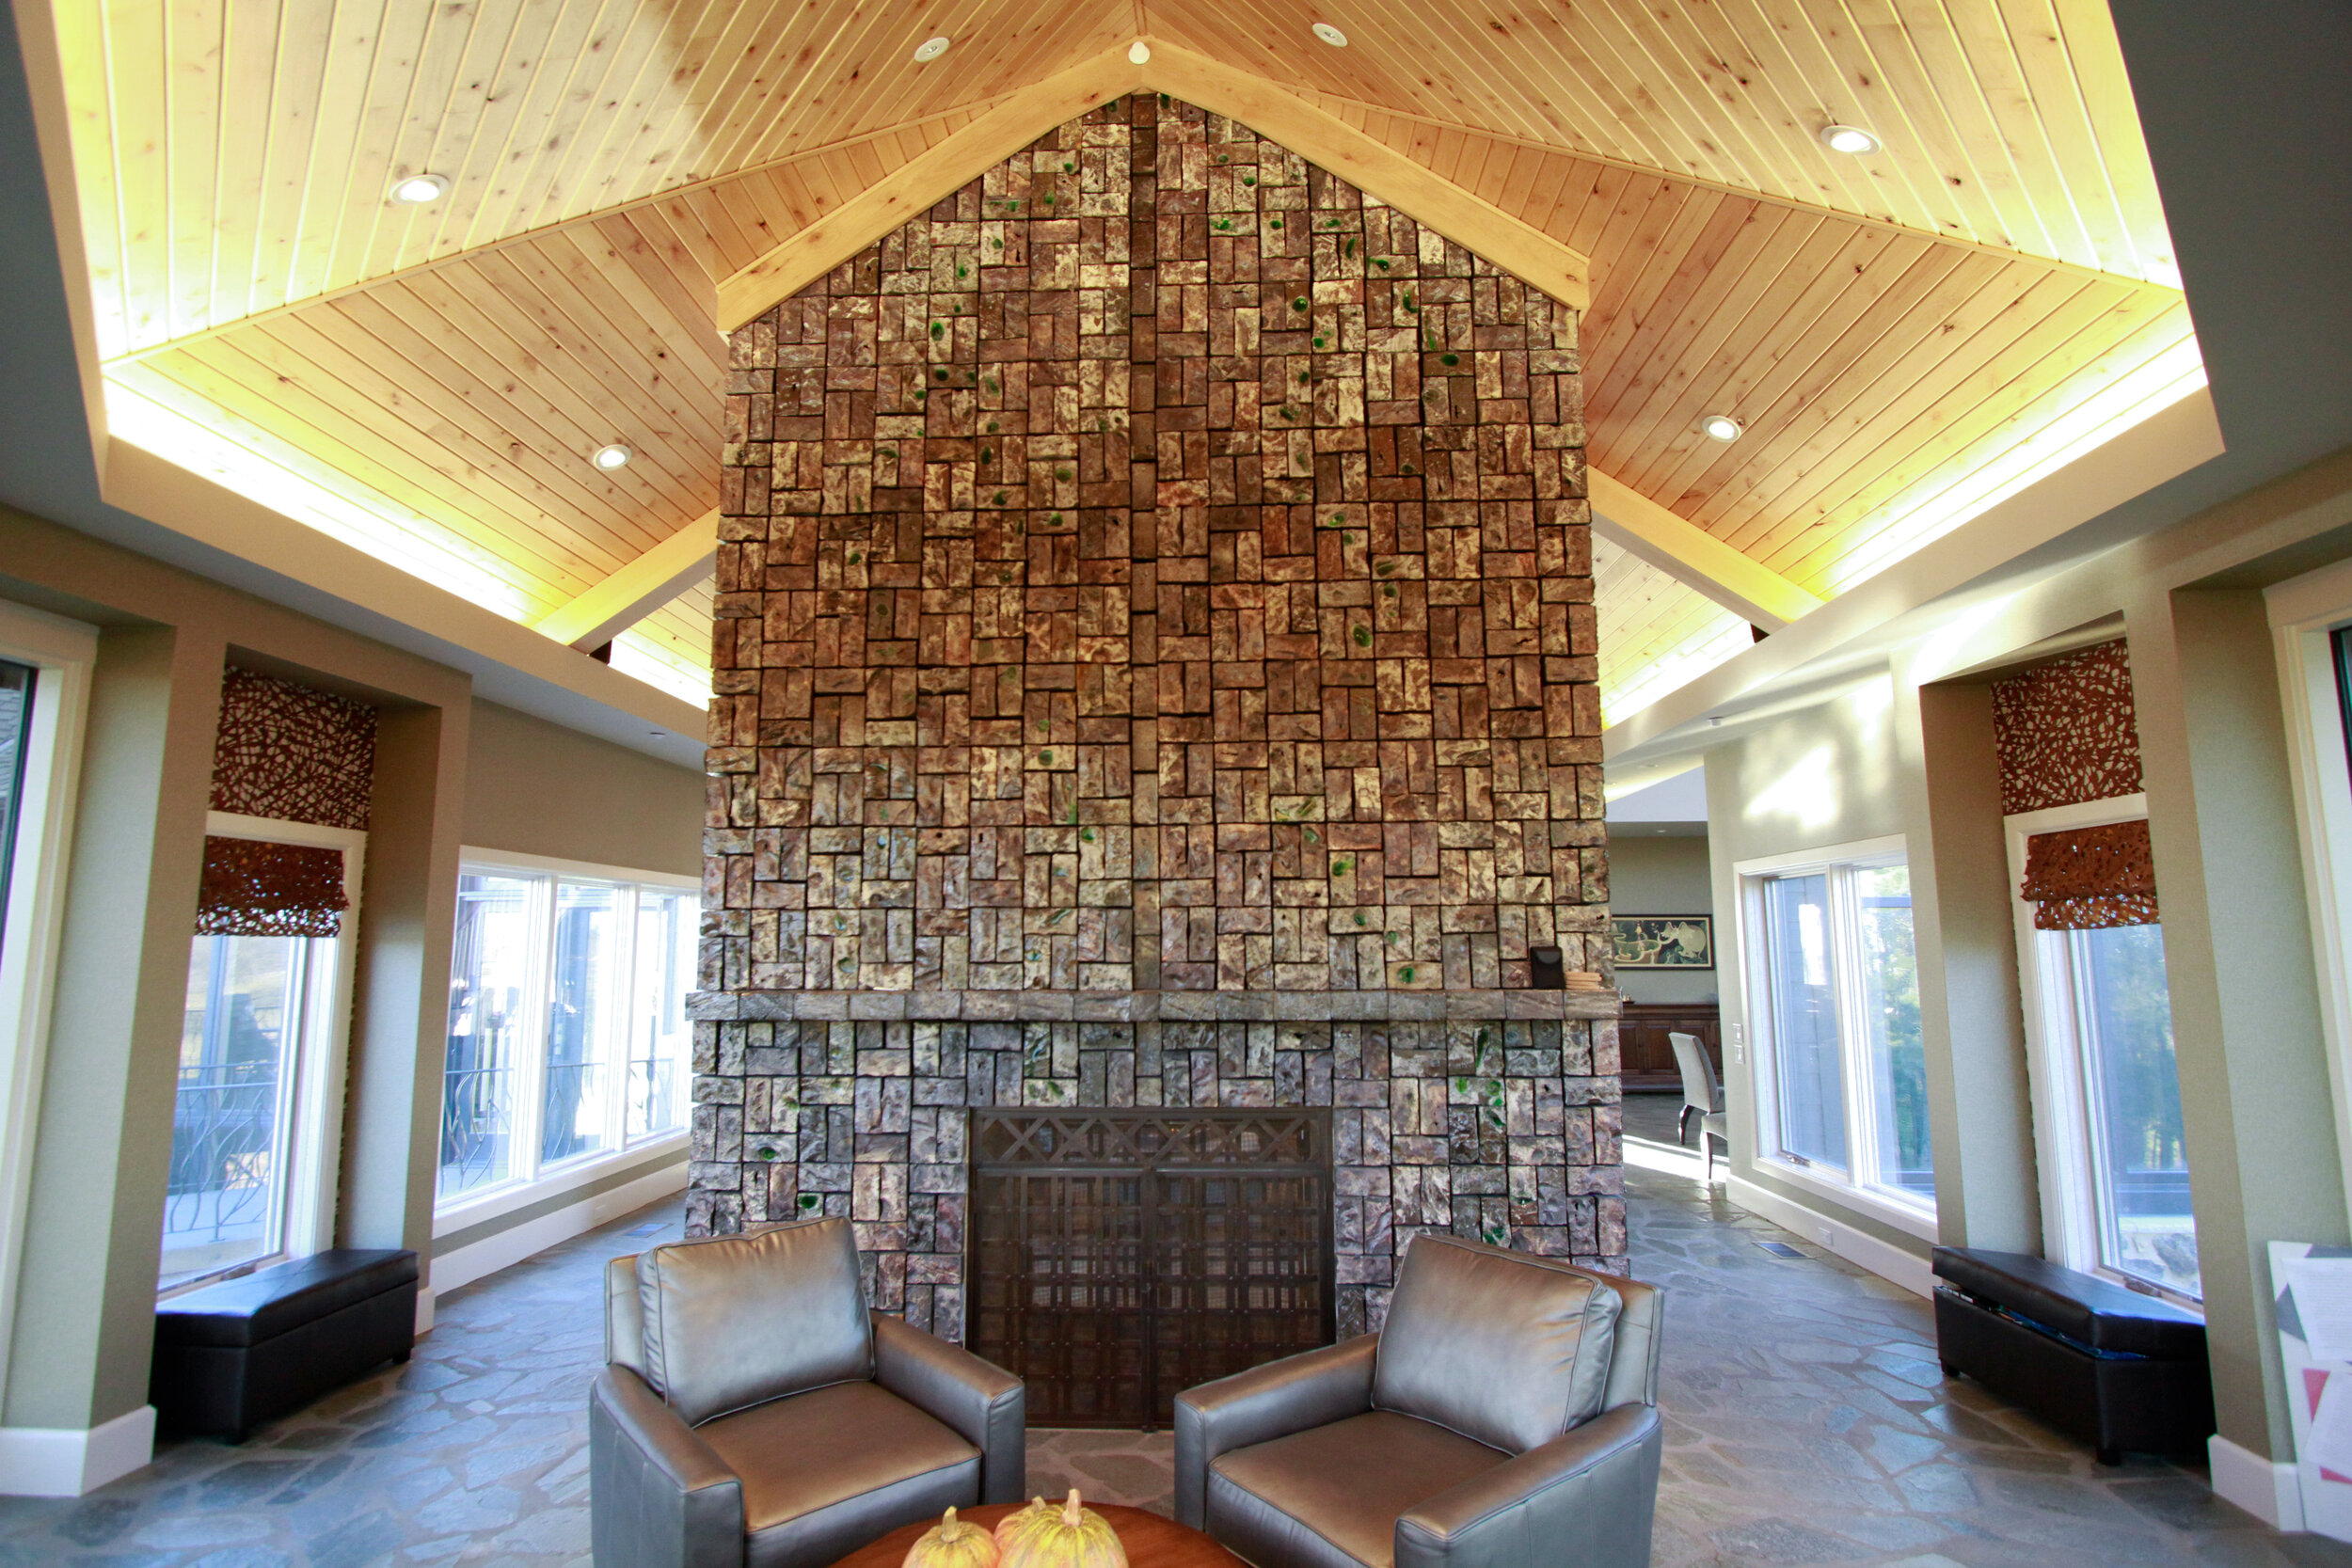 Carved and salt glazed bricks create an iridescent surface for this cathedral ceiling height fireplace in Nashville, NE